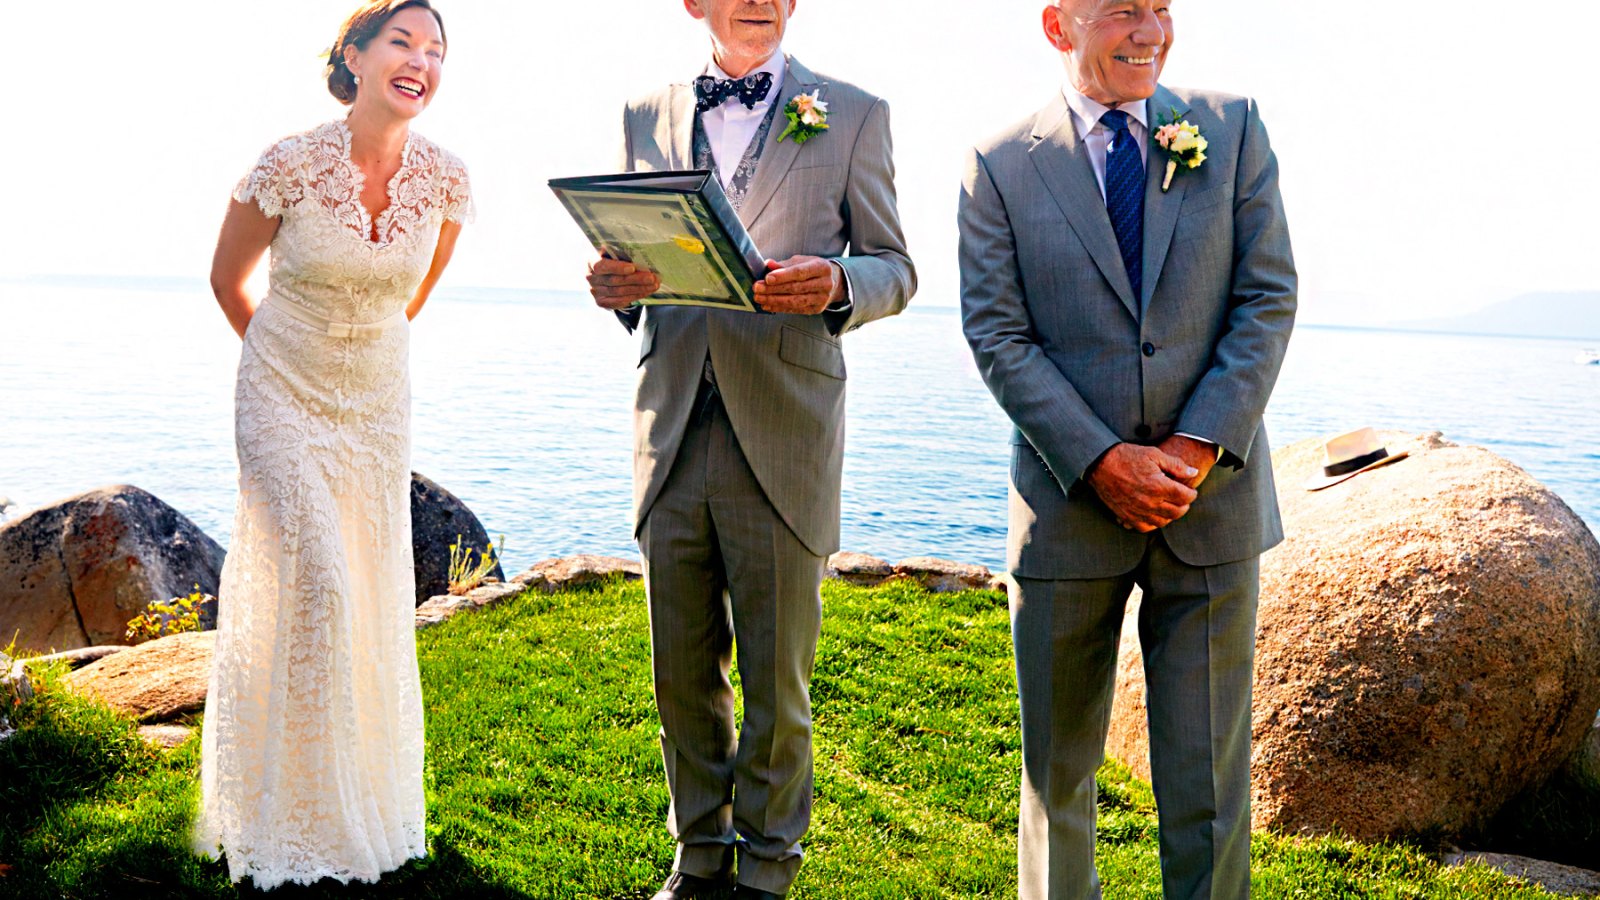 Sir Patrick and Ms. Ozell were married on Sept. 7